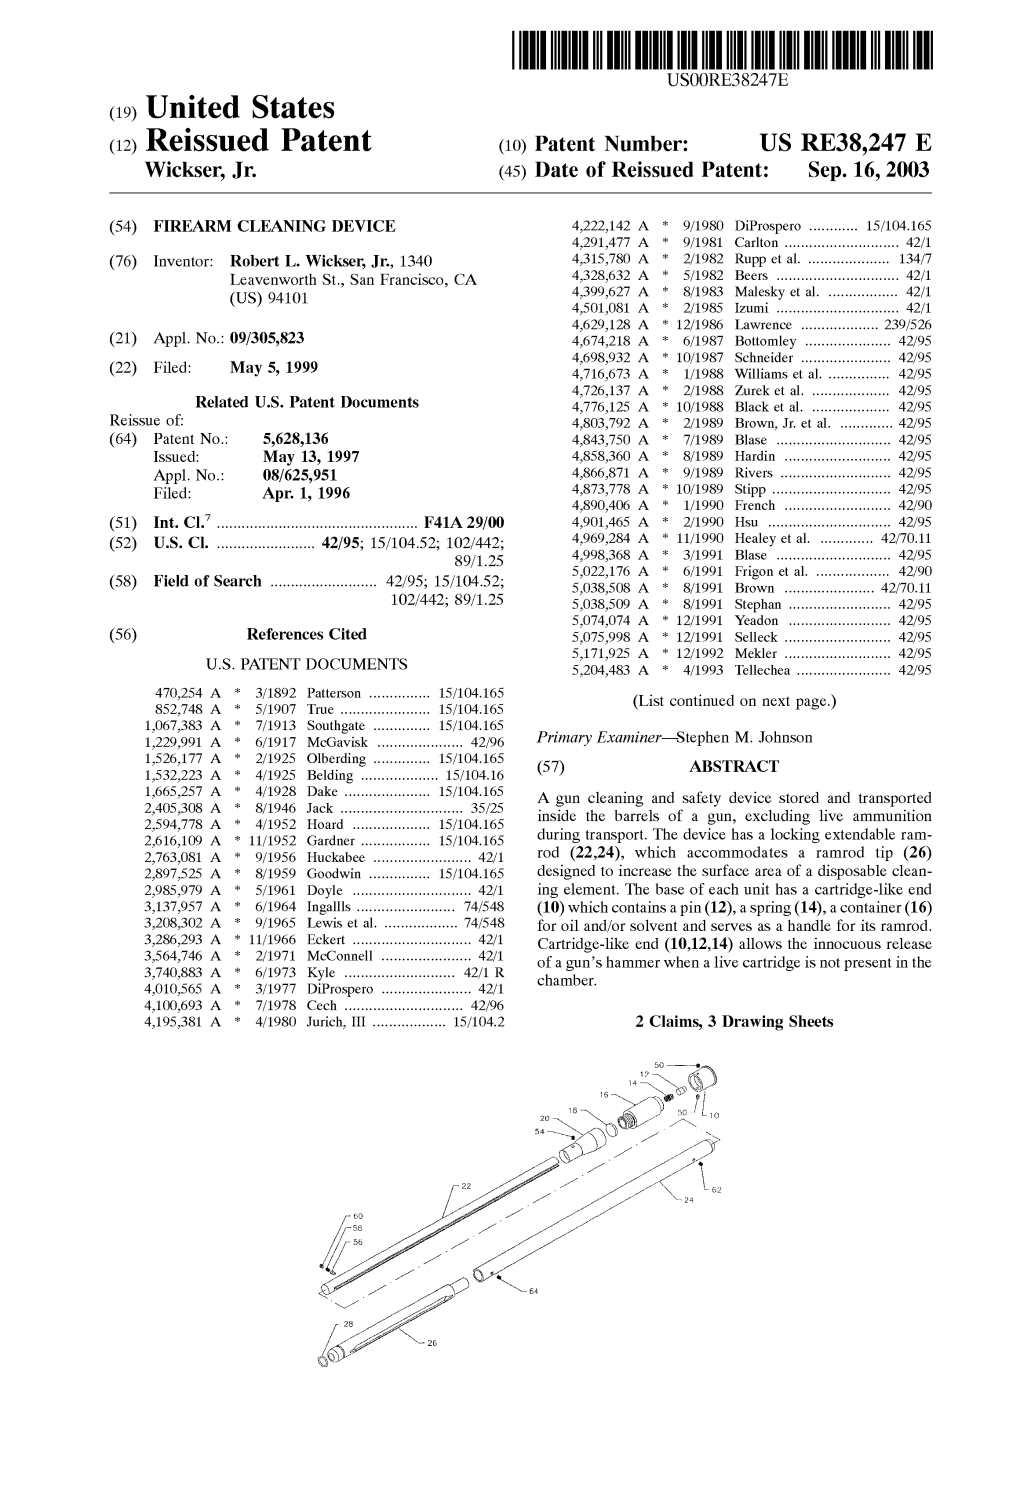 (19) United States (12) Reissued Patent (10) Patent Number: US RE38,247 E Wickser, Jr